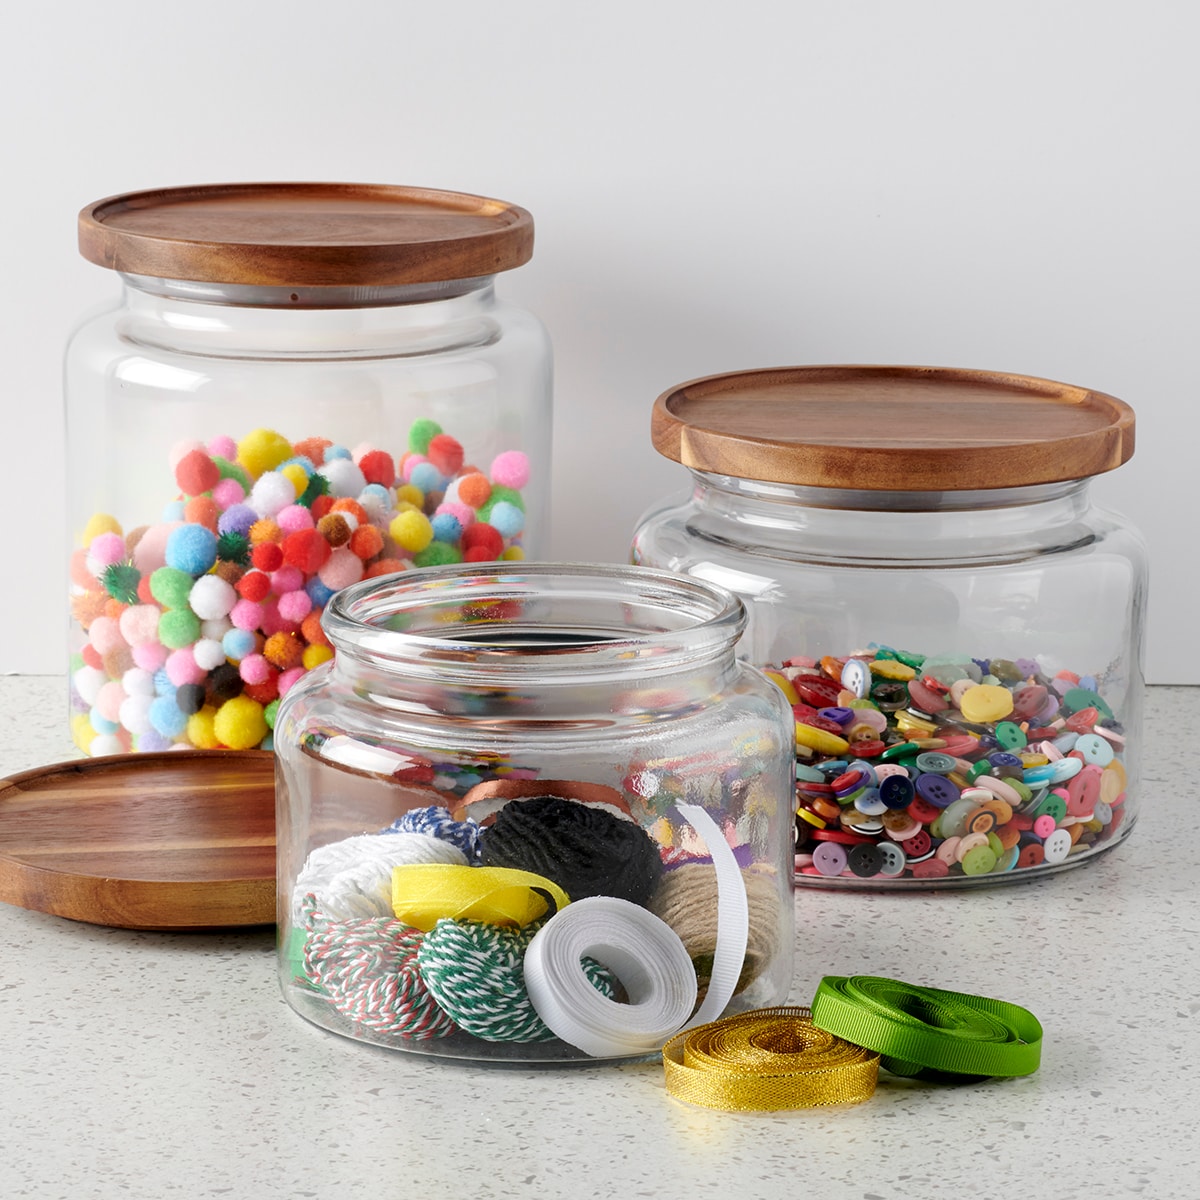 EkkoVla 3 Pack 1/2 Gallon 64 oz Glass Cookie Jars with Airtight Lids 2  Liters Clear Container Organization Canister Sets for Kitchen, Storage  Candy